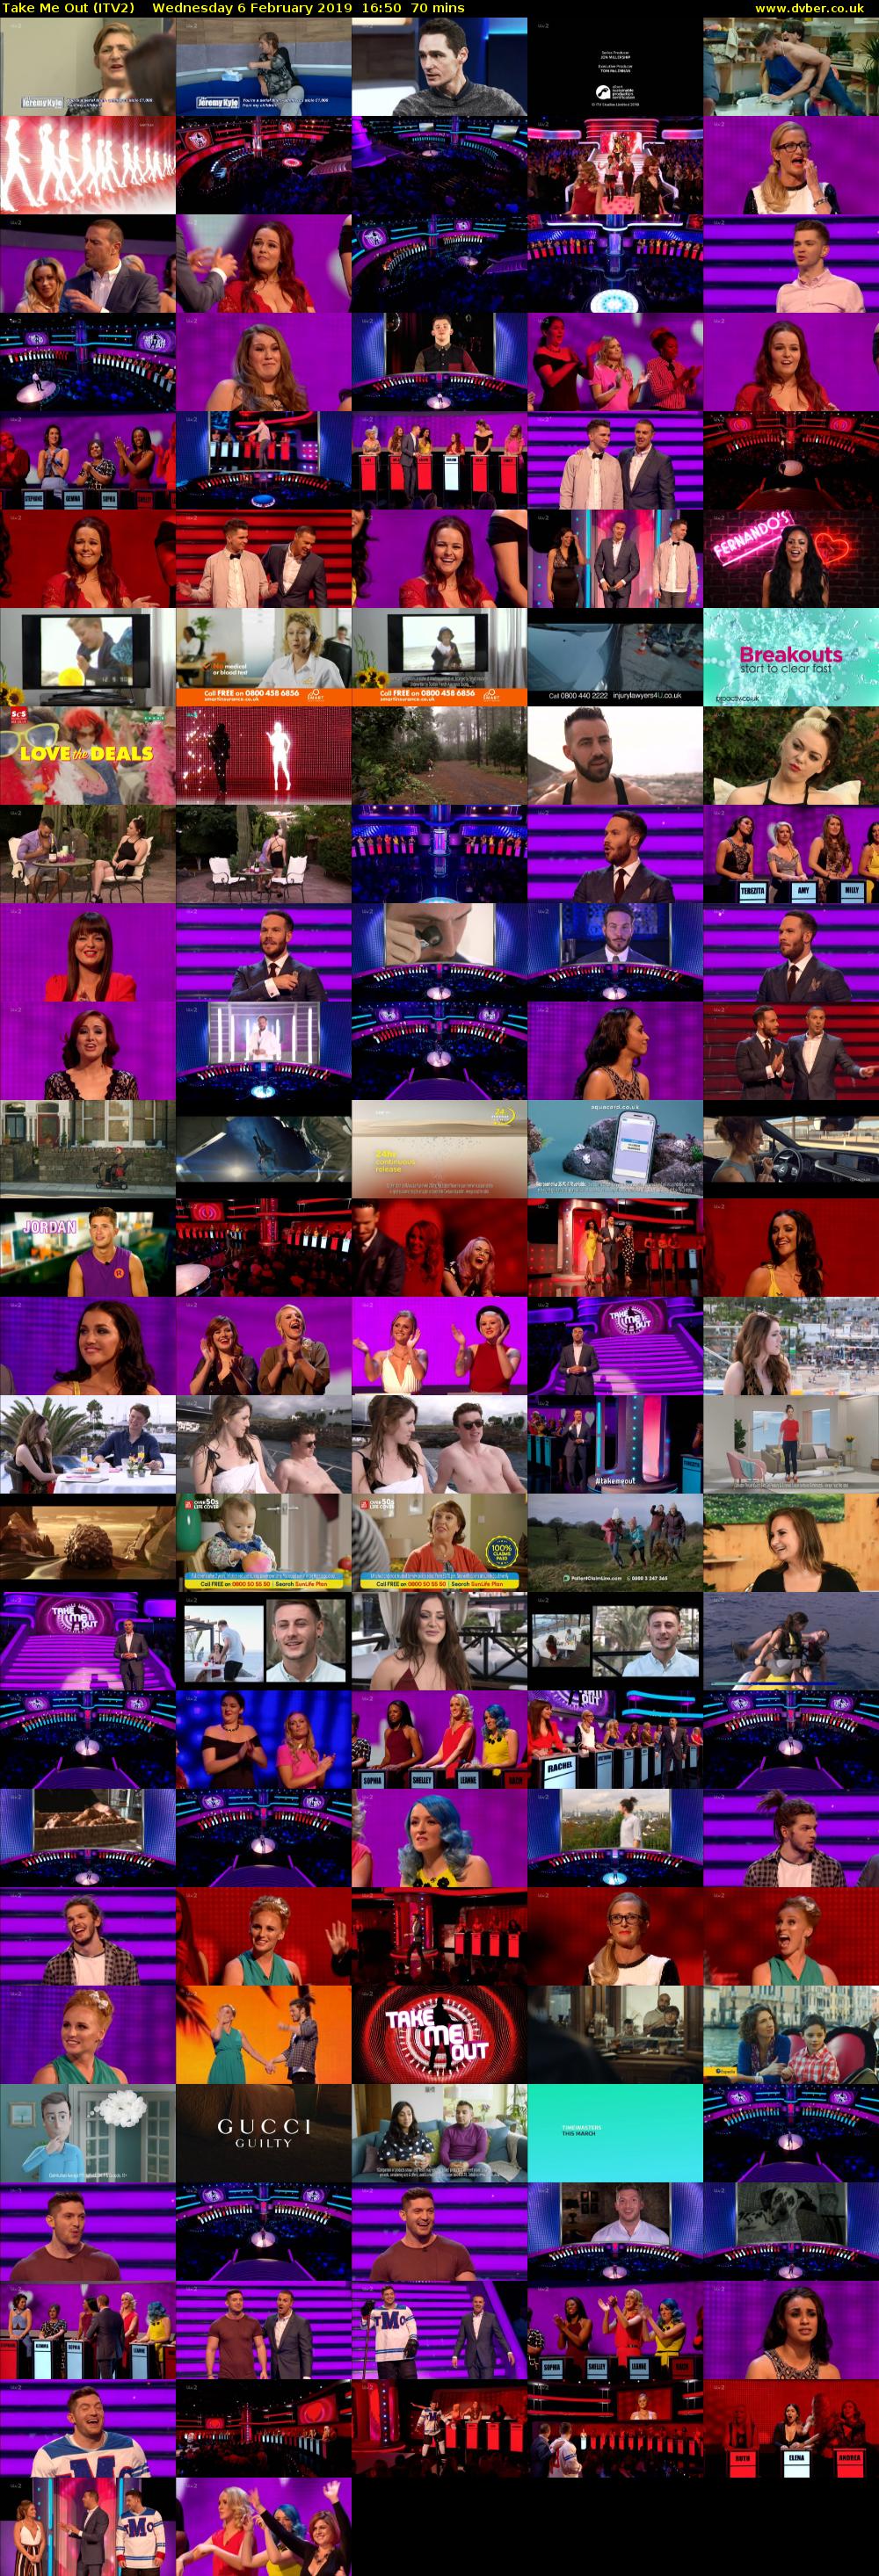 Take Me Out (ITV2) Wednesday 6 February 2019 16:50 - 18:00